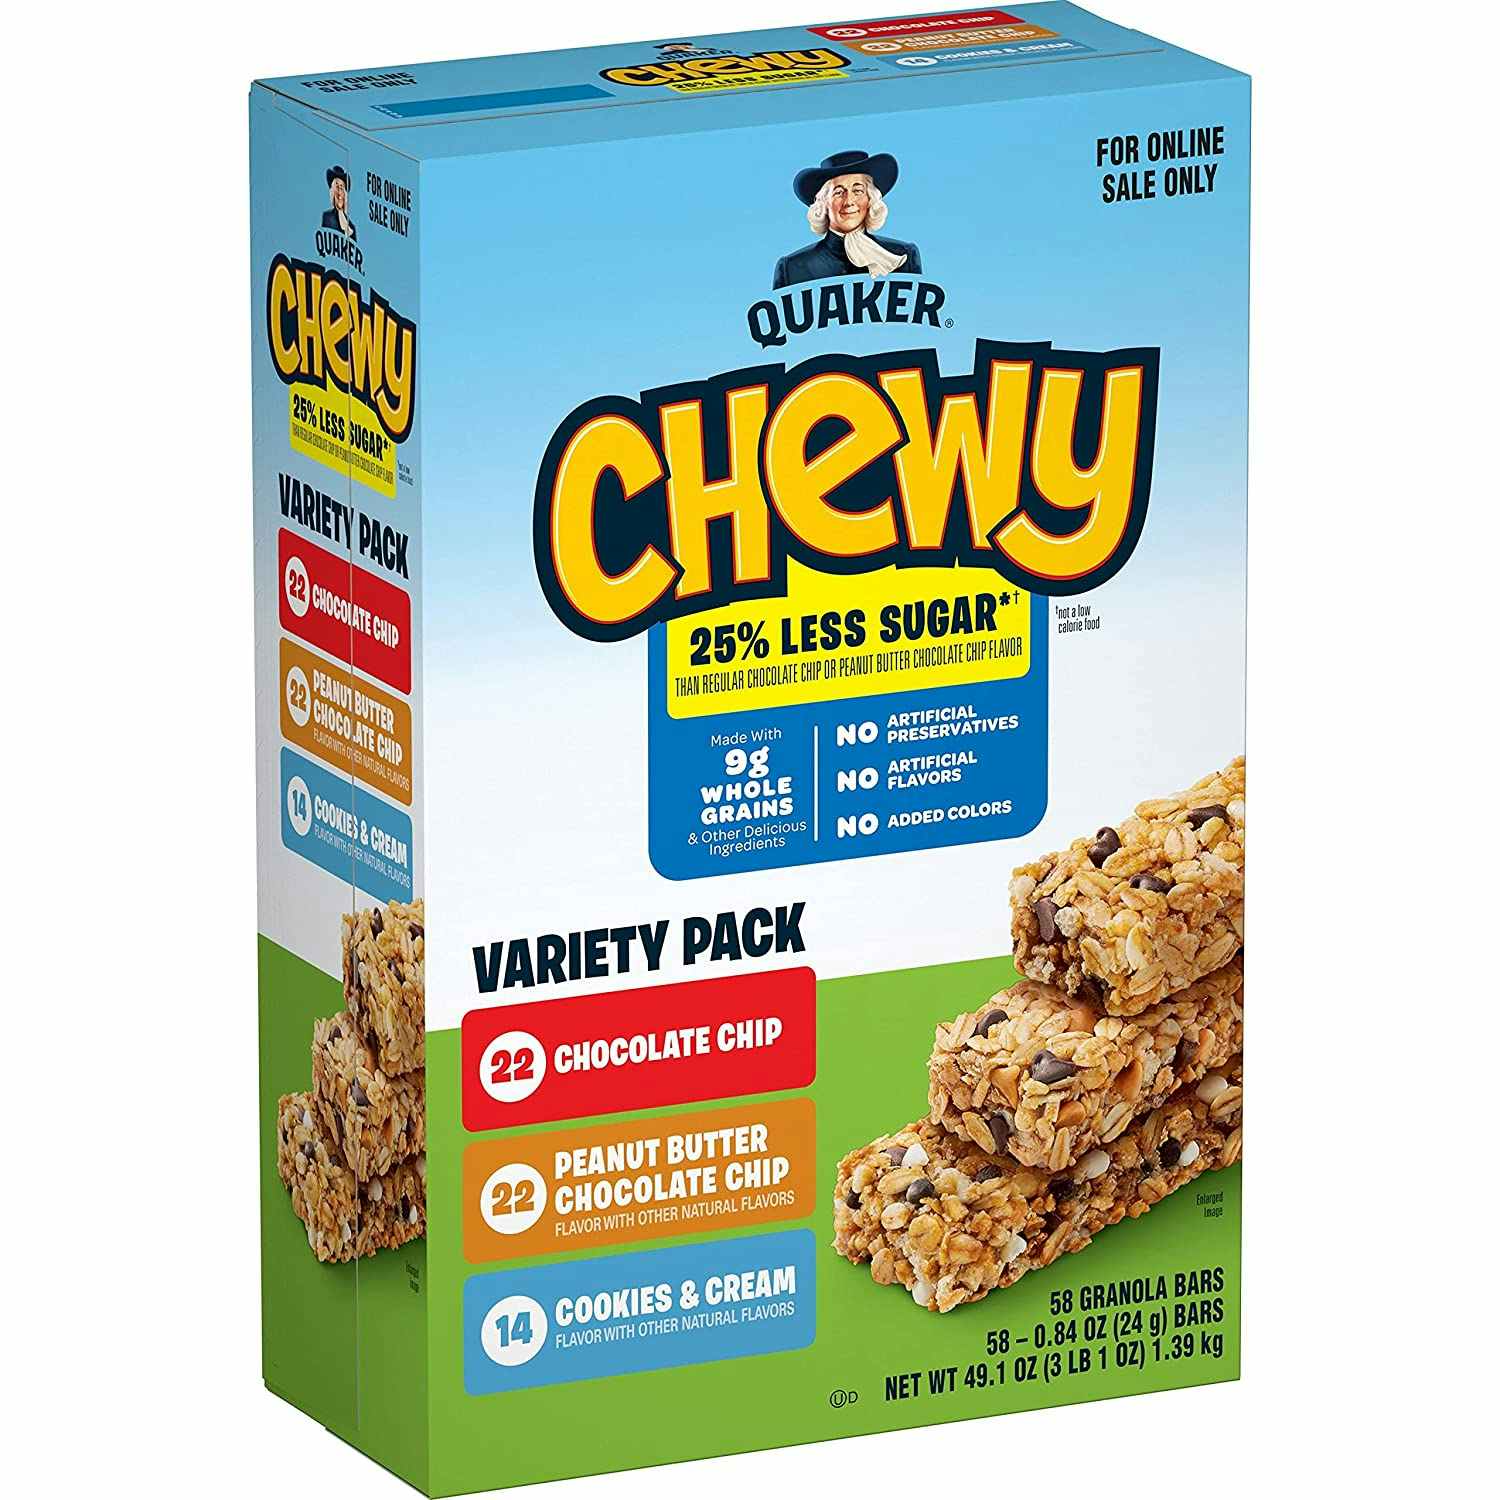 A box of Quaker chewy bars.